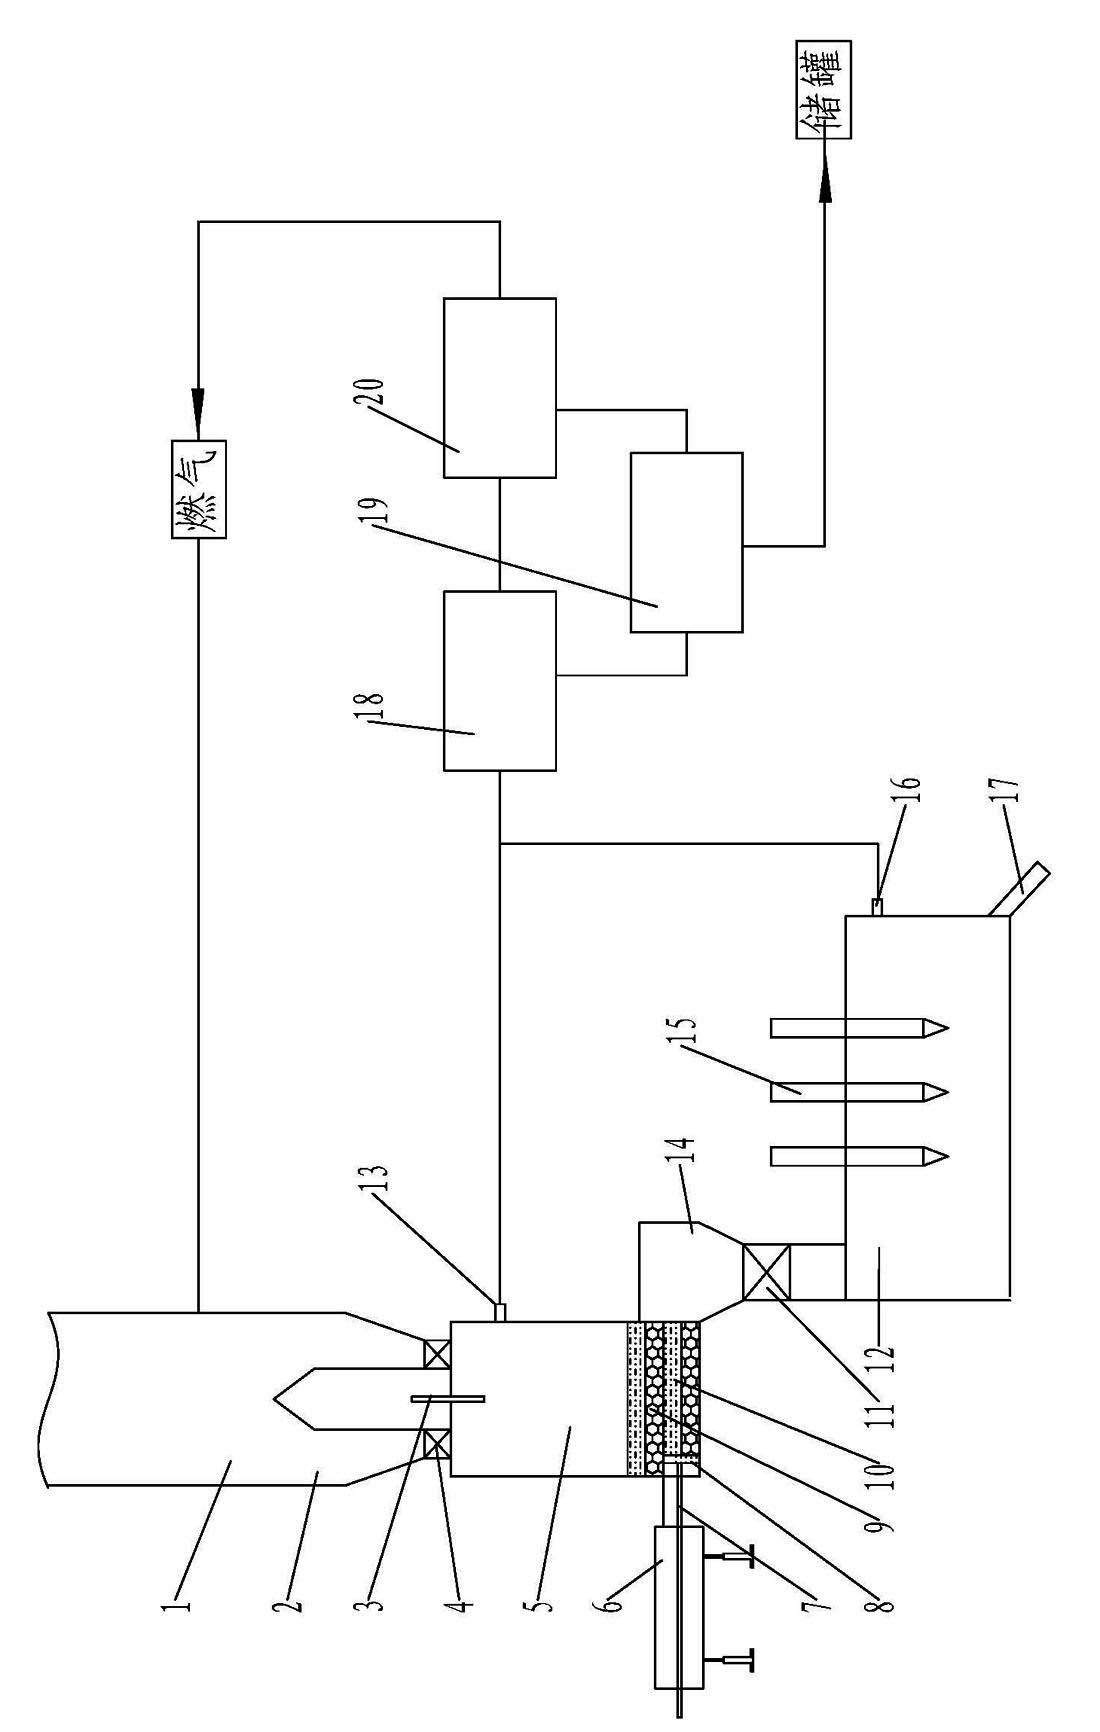 Production device for calcium carbide co-production coking product